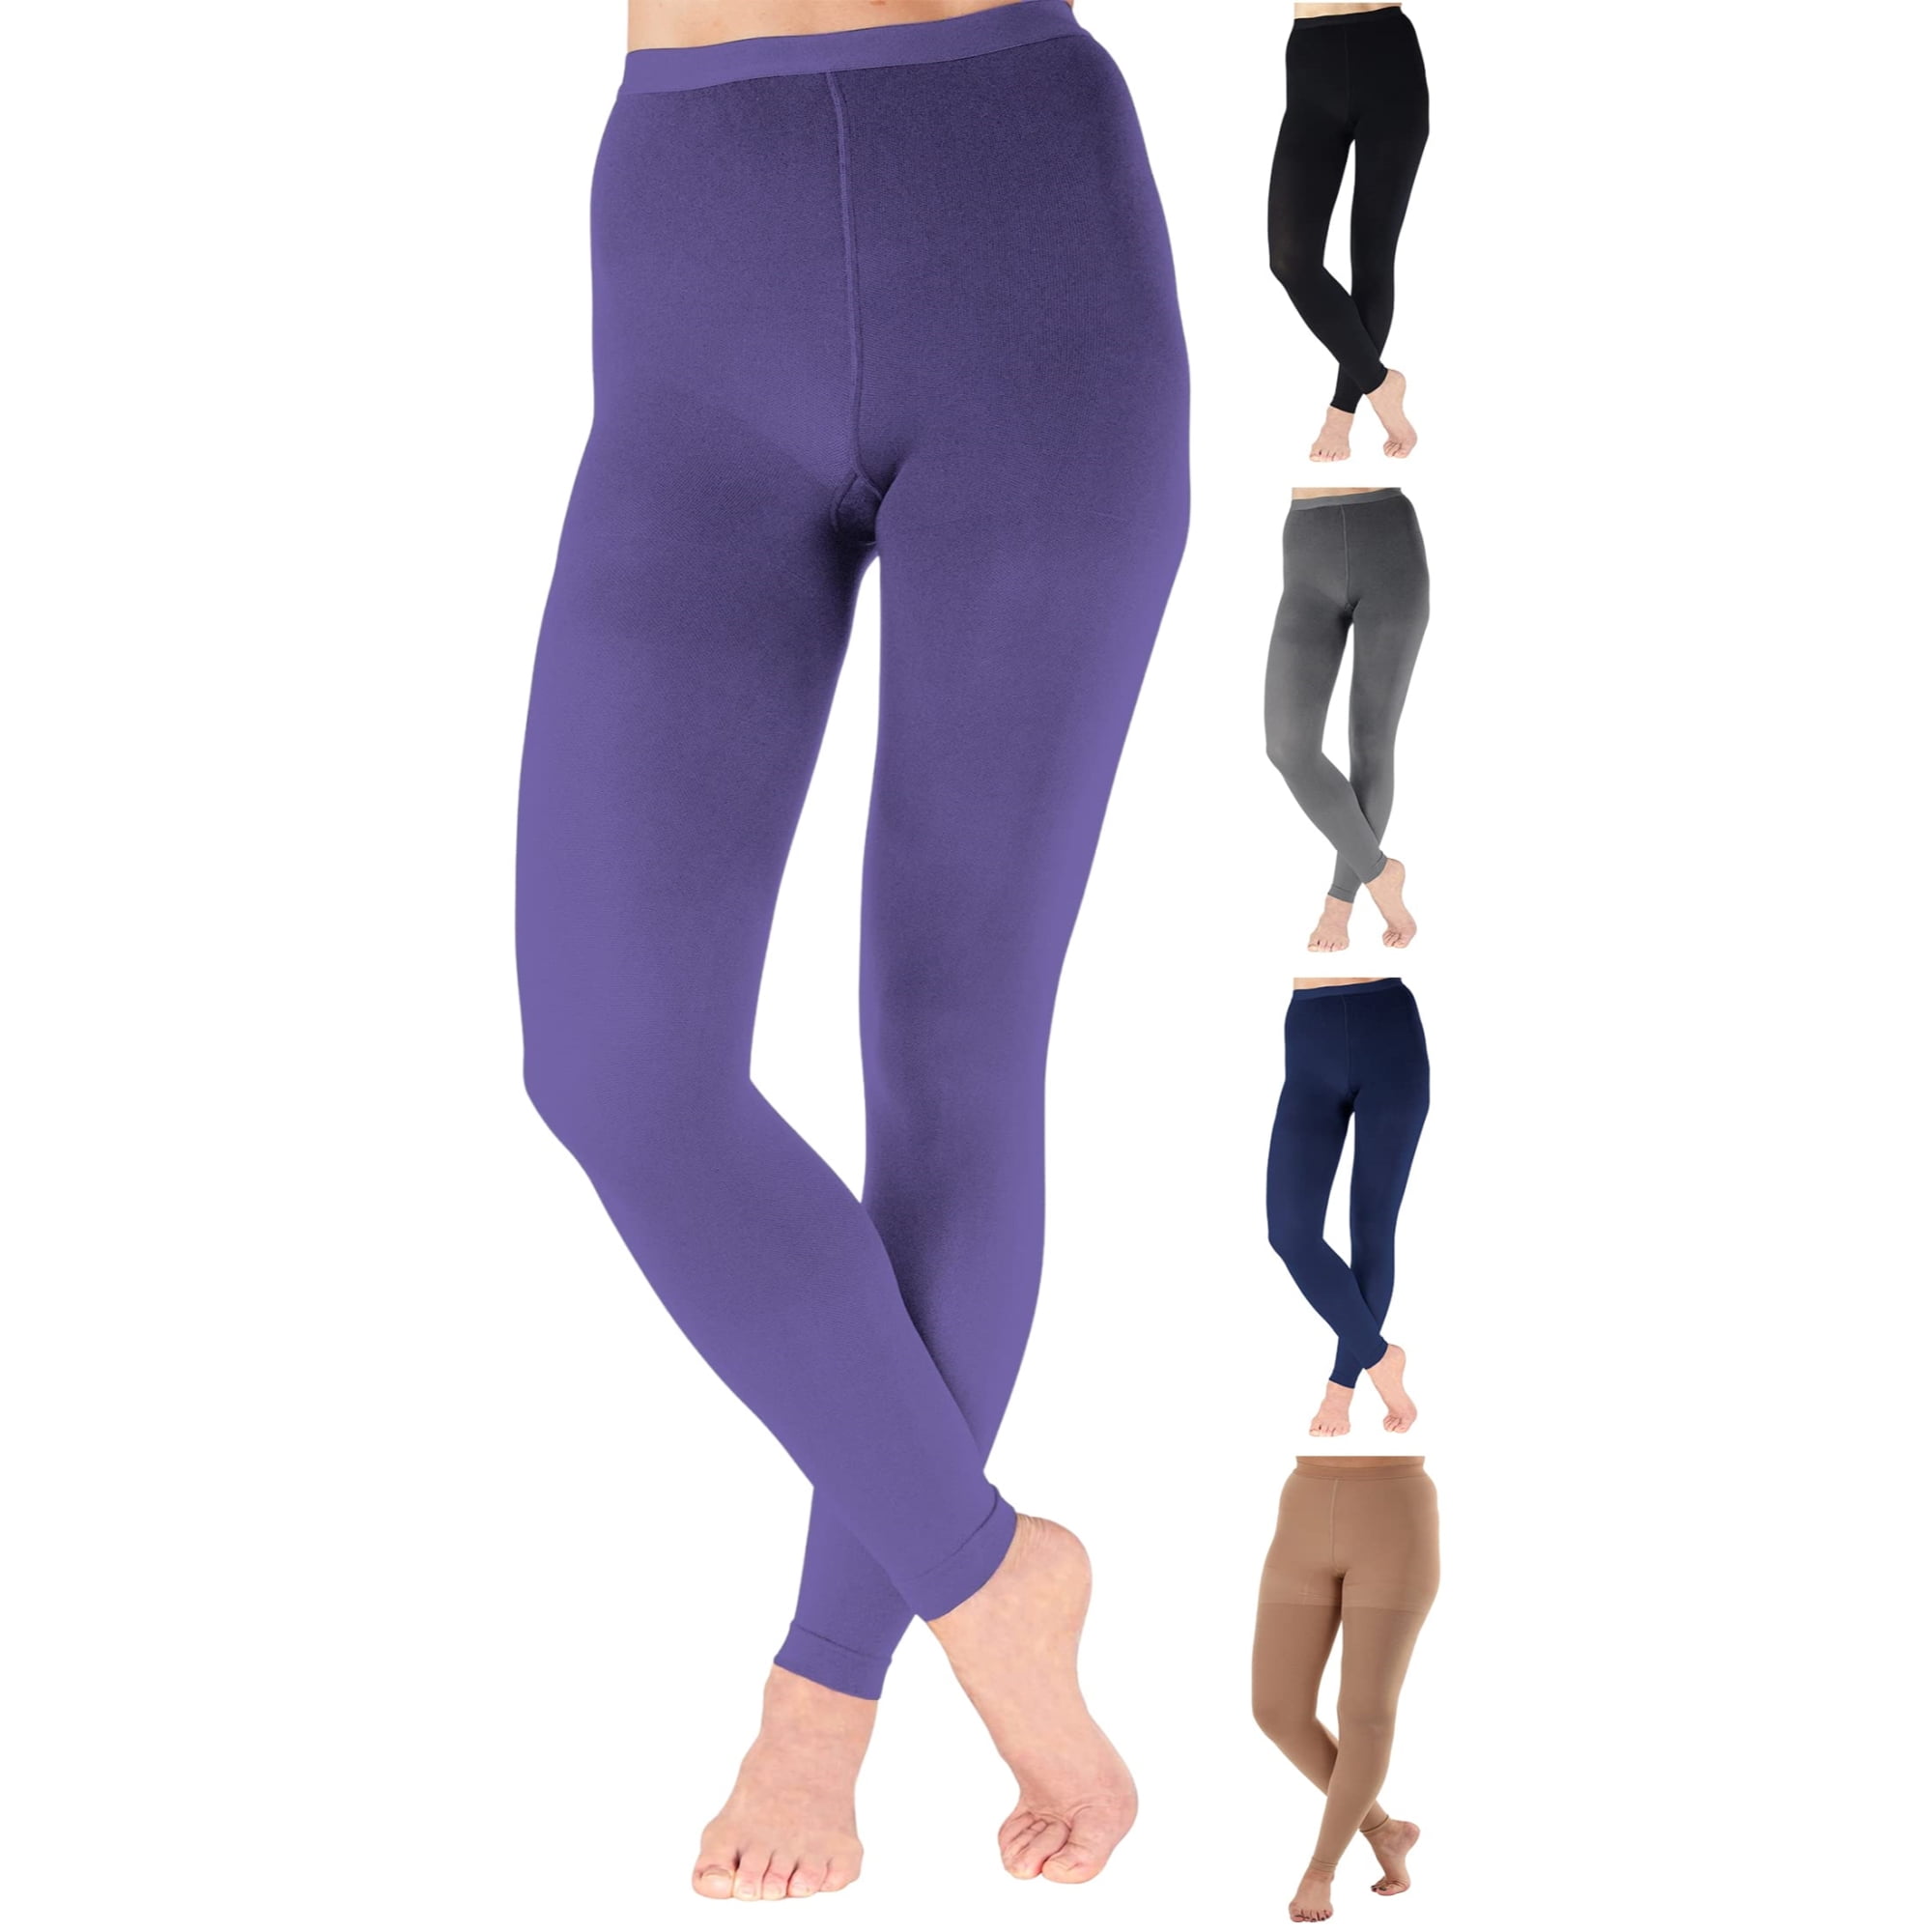 Compression Leggings for Women 20-30mmHg by Absolute Support - Purple, Small  